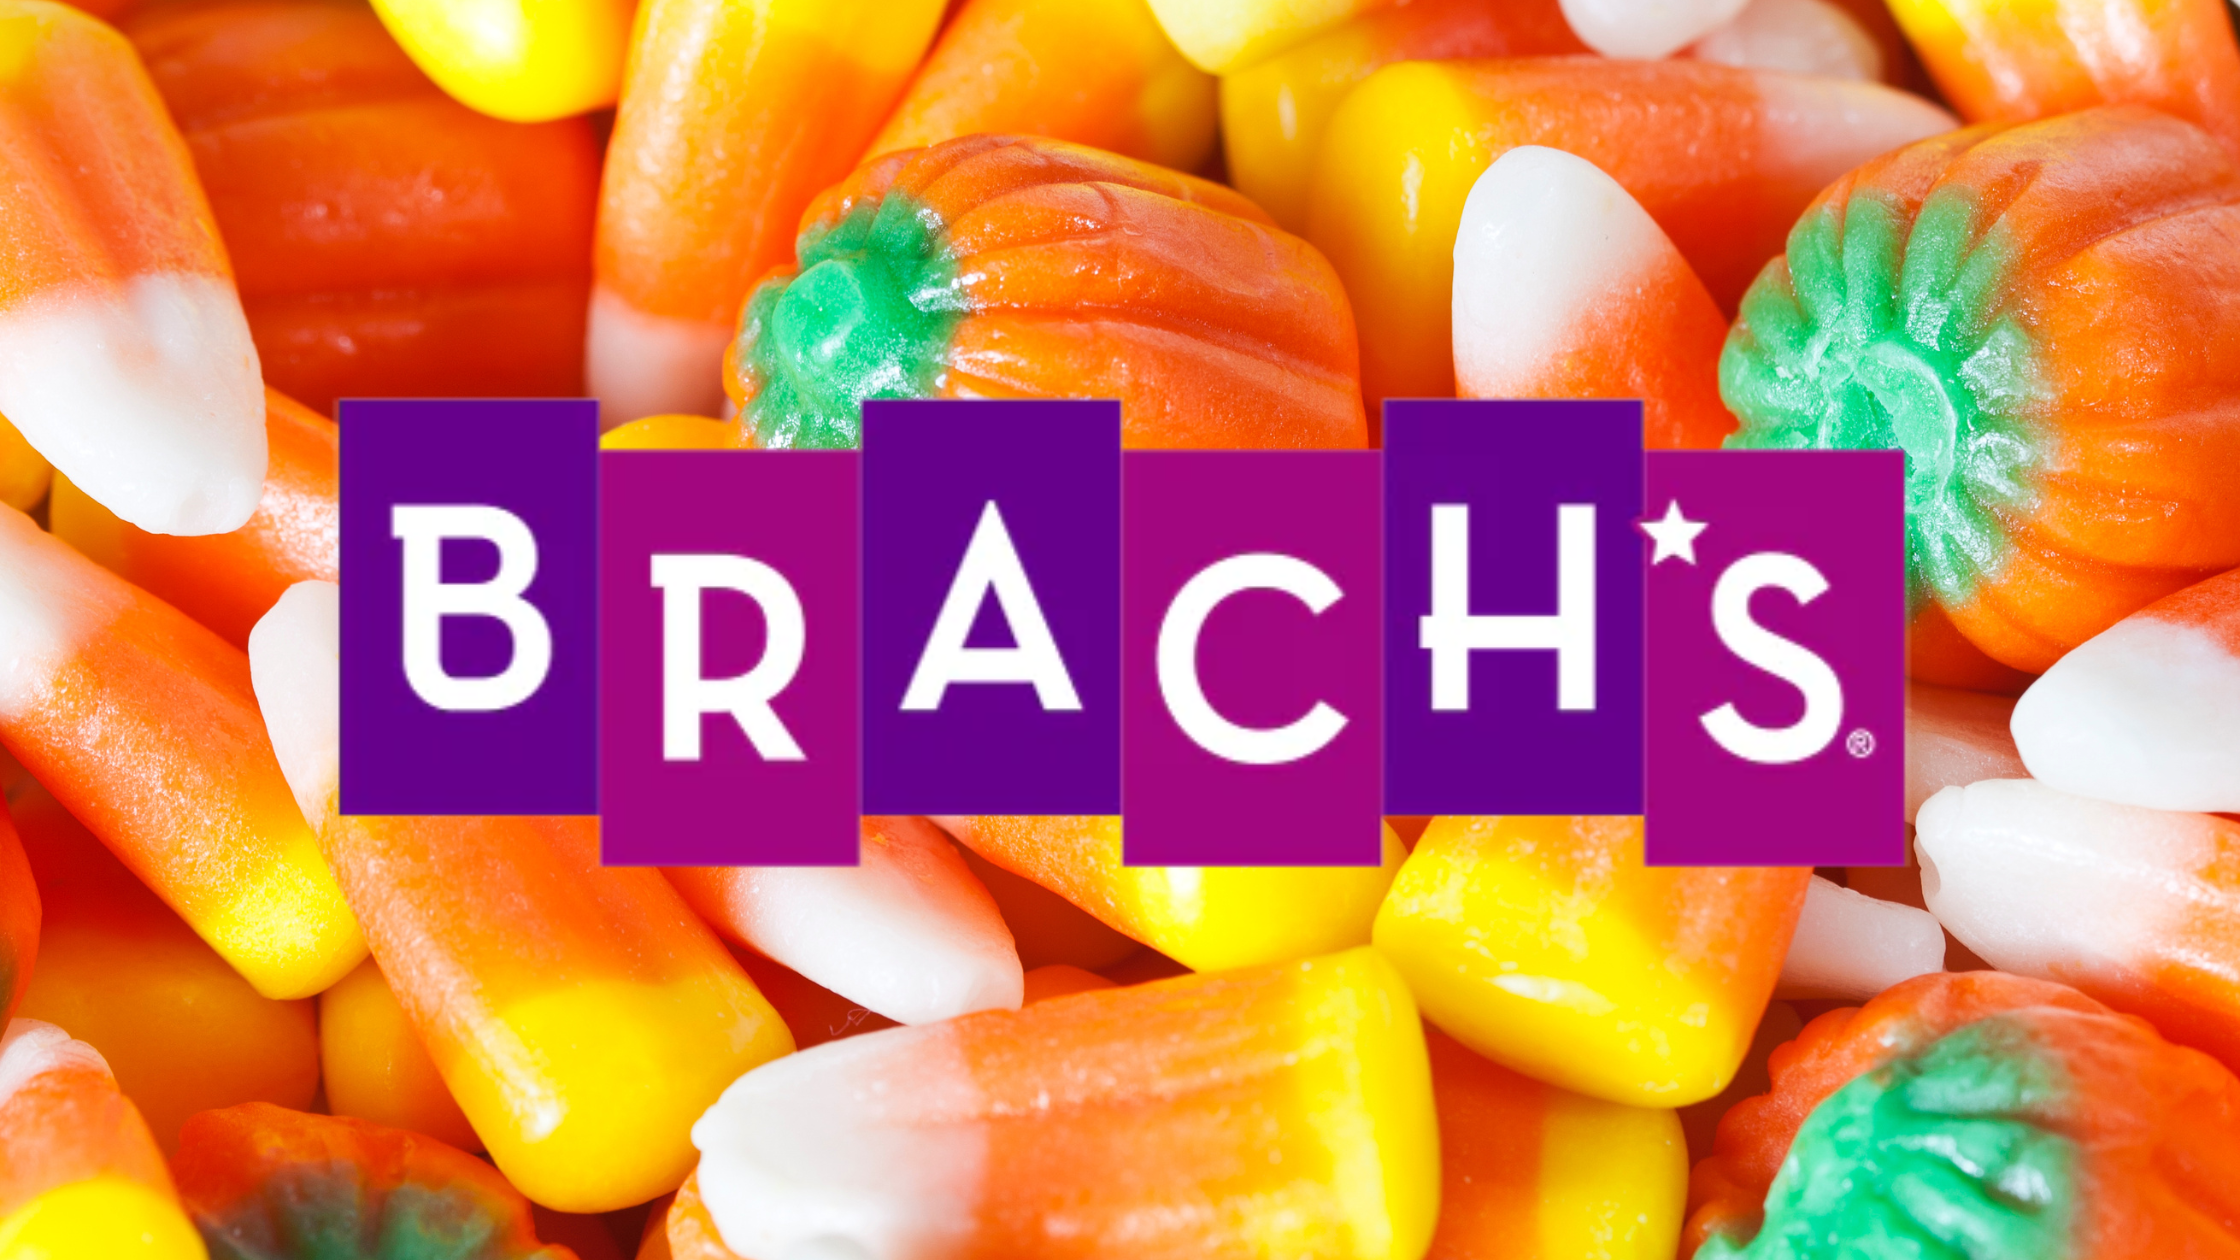 The Best Brach’s Candy List Ever Published Online